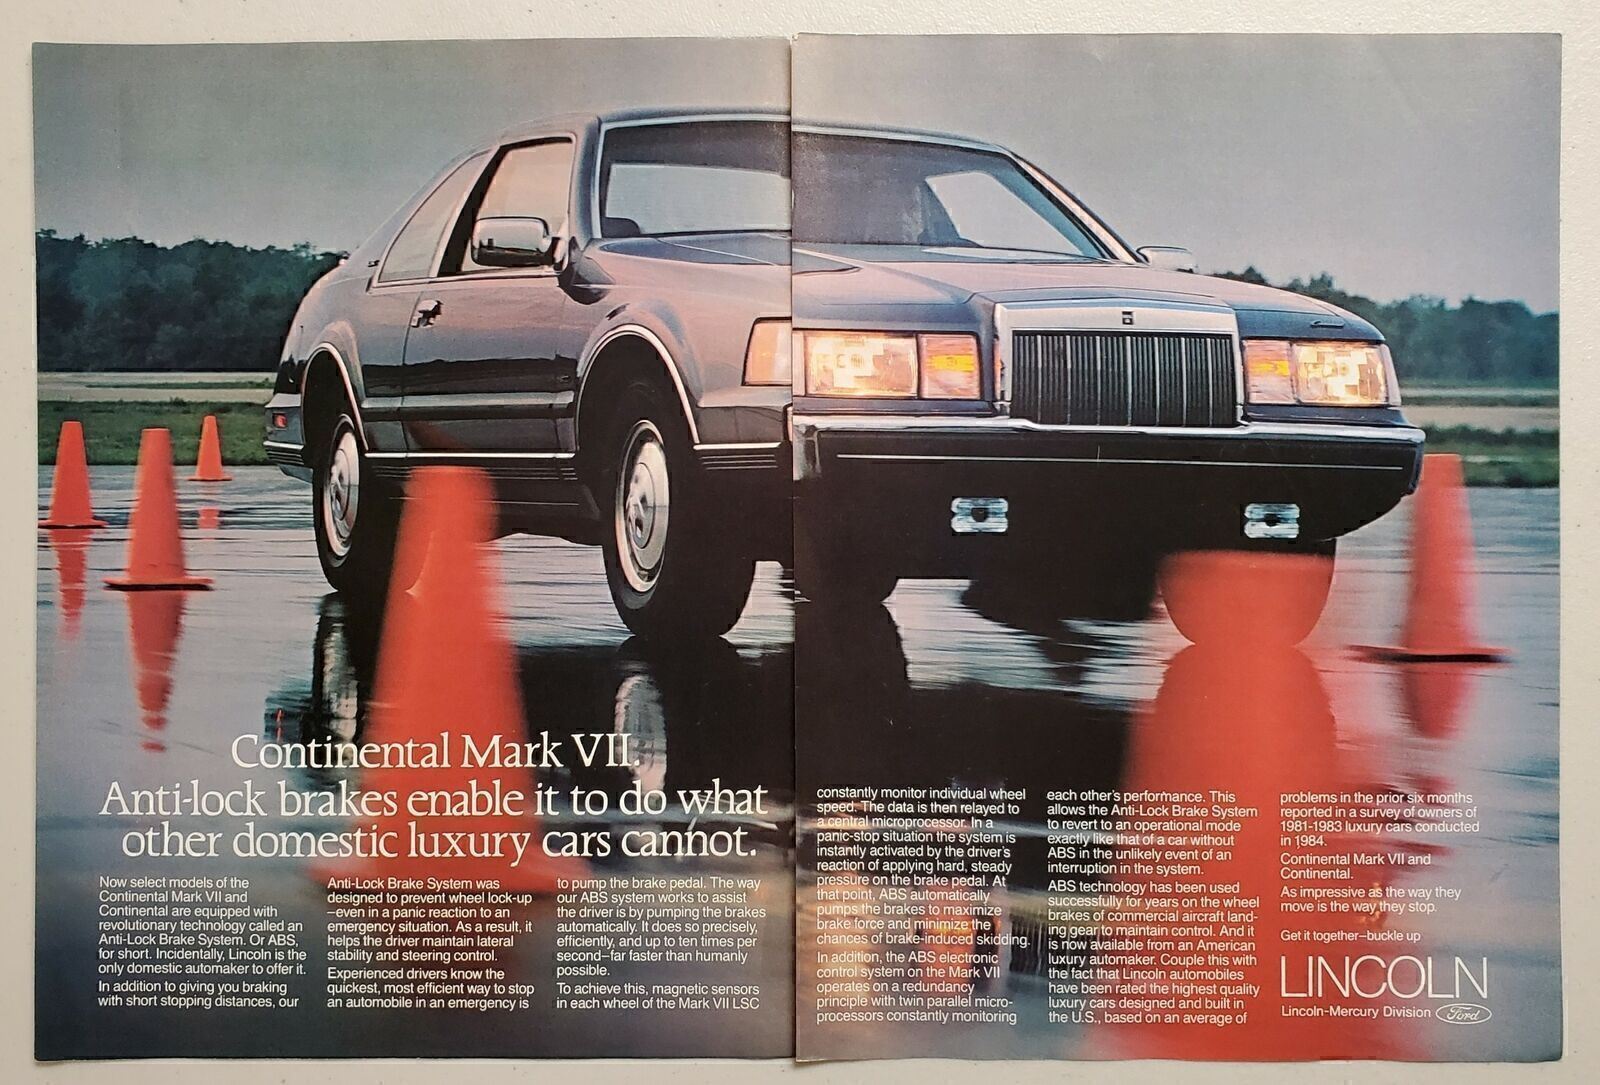 1985 Print Ad Lincoln Continental Mark VII 2-Door Luxury Cars